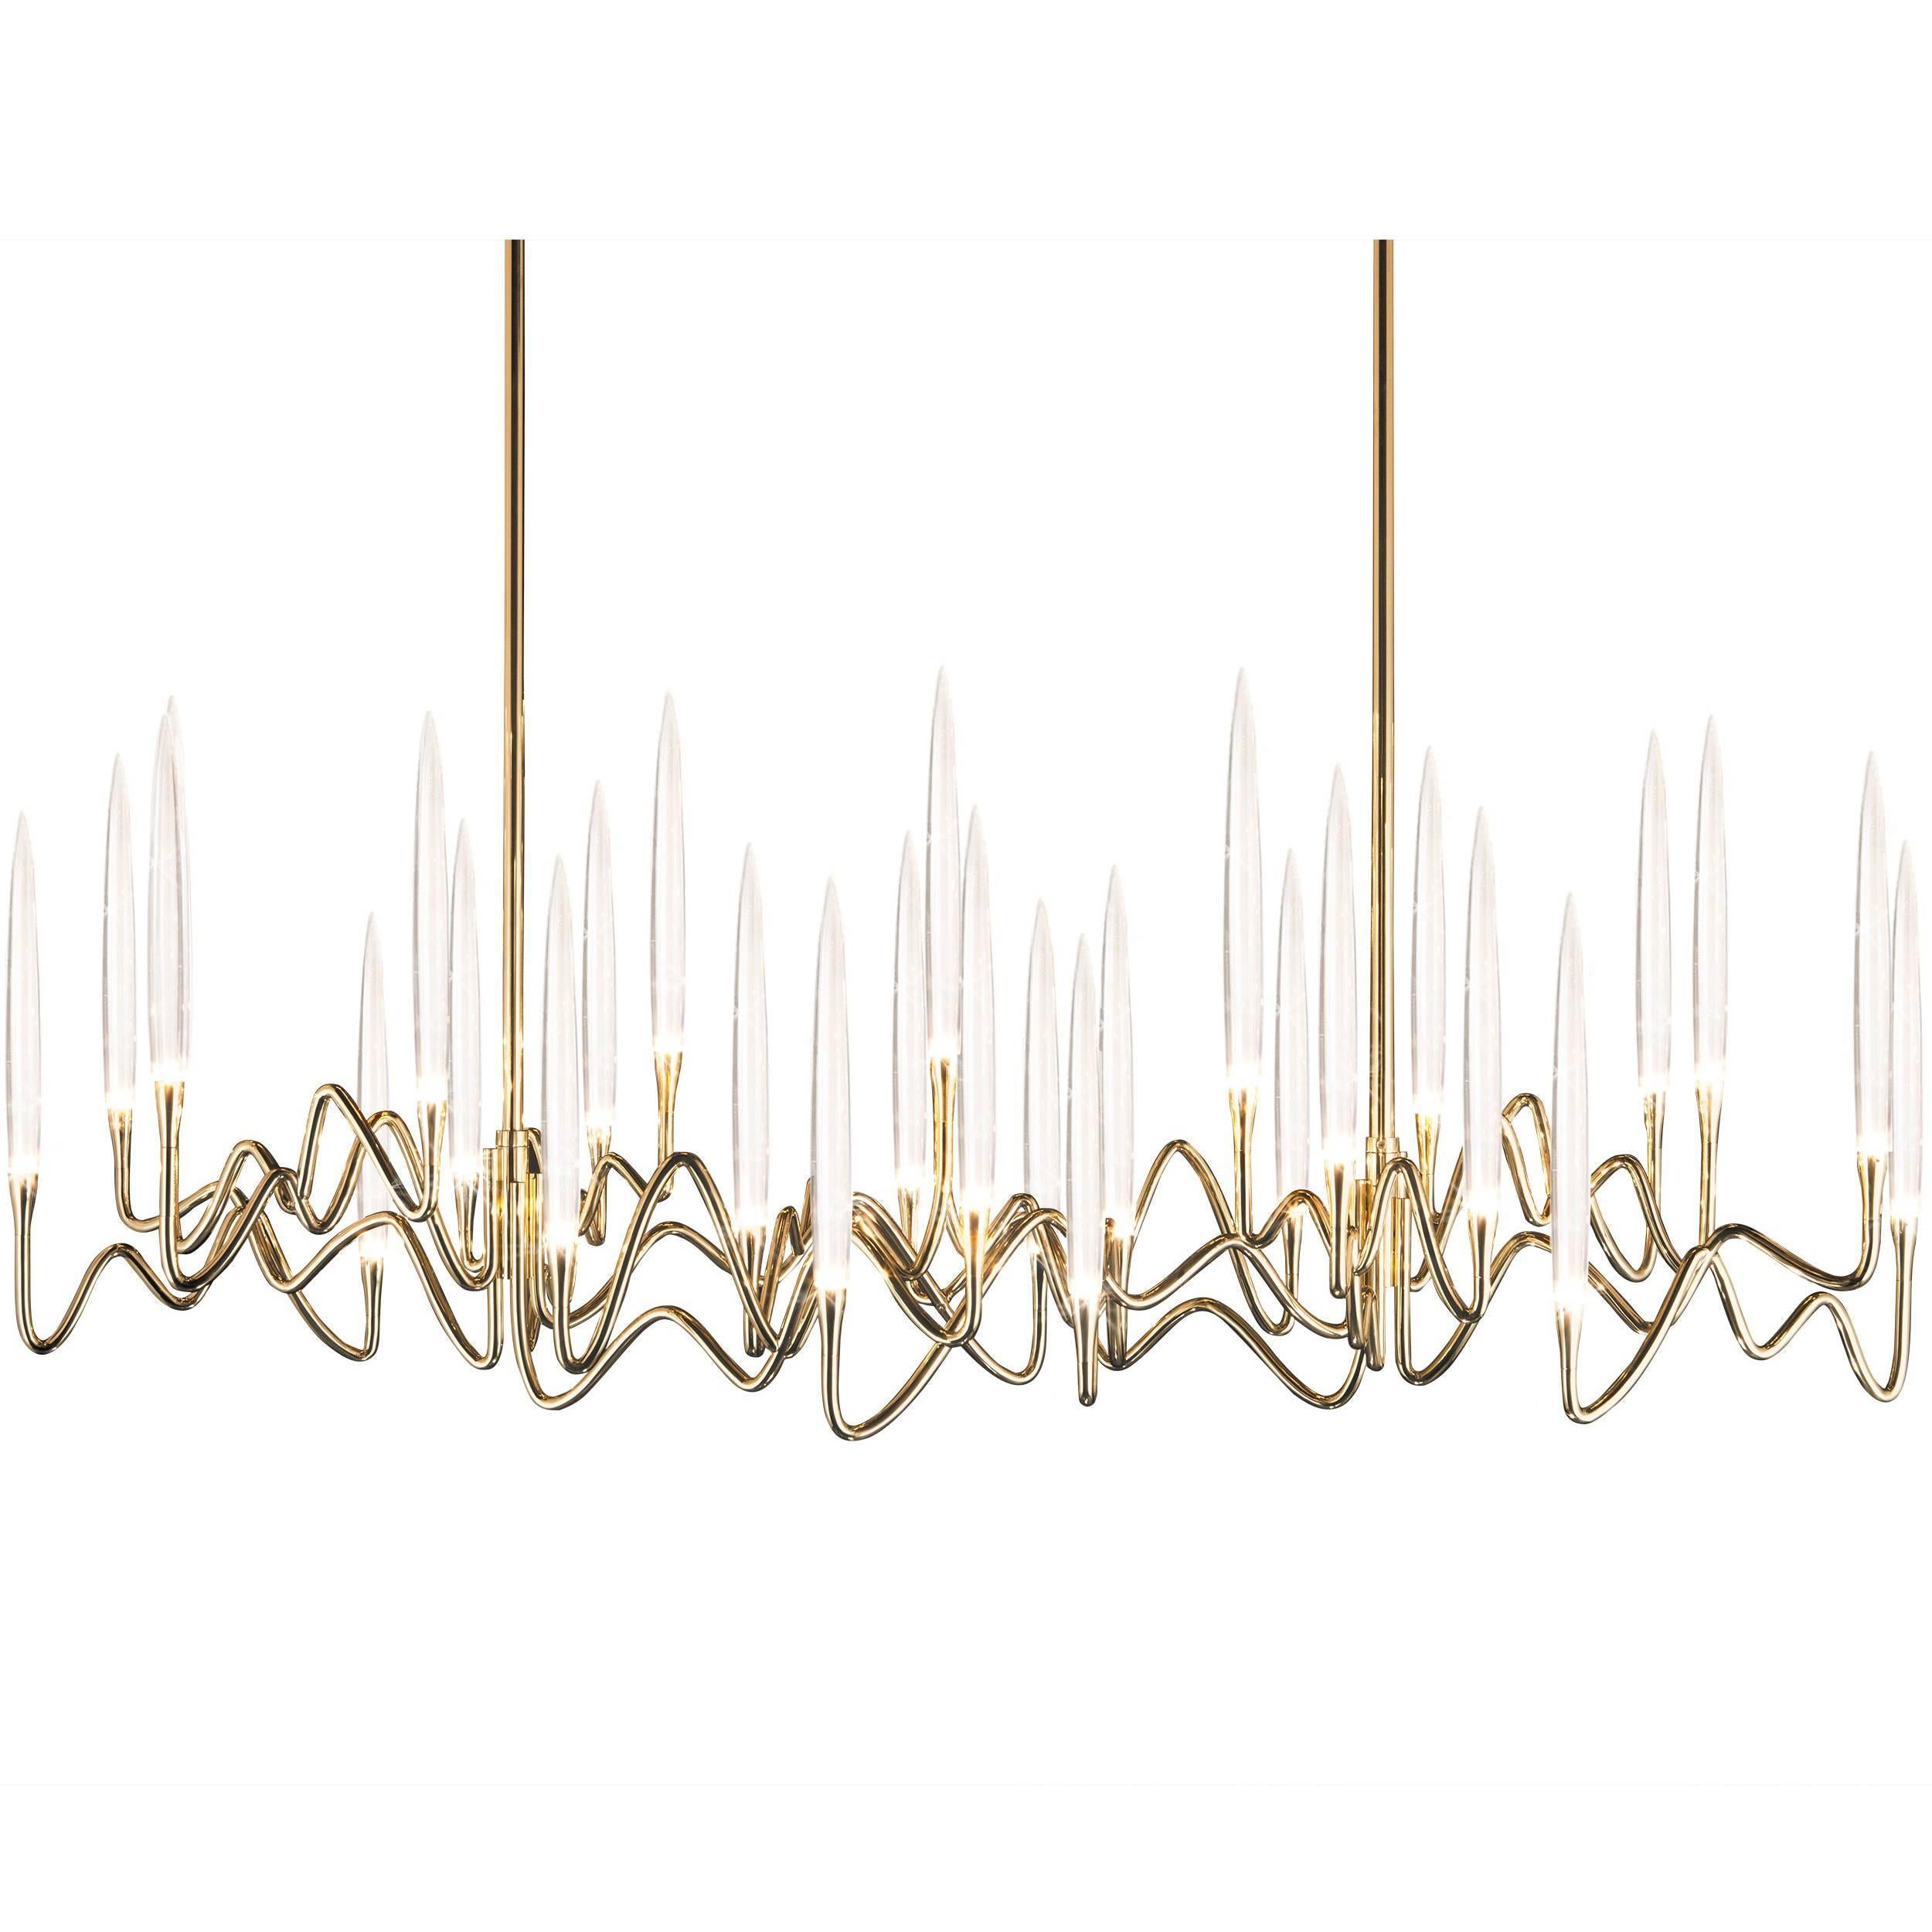 "Il Pezzo 3 Long Chandelier" with a hand forged gold brass structure and crystal